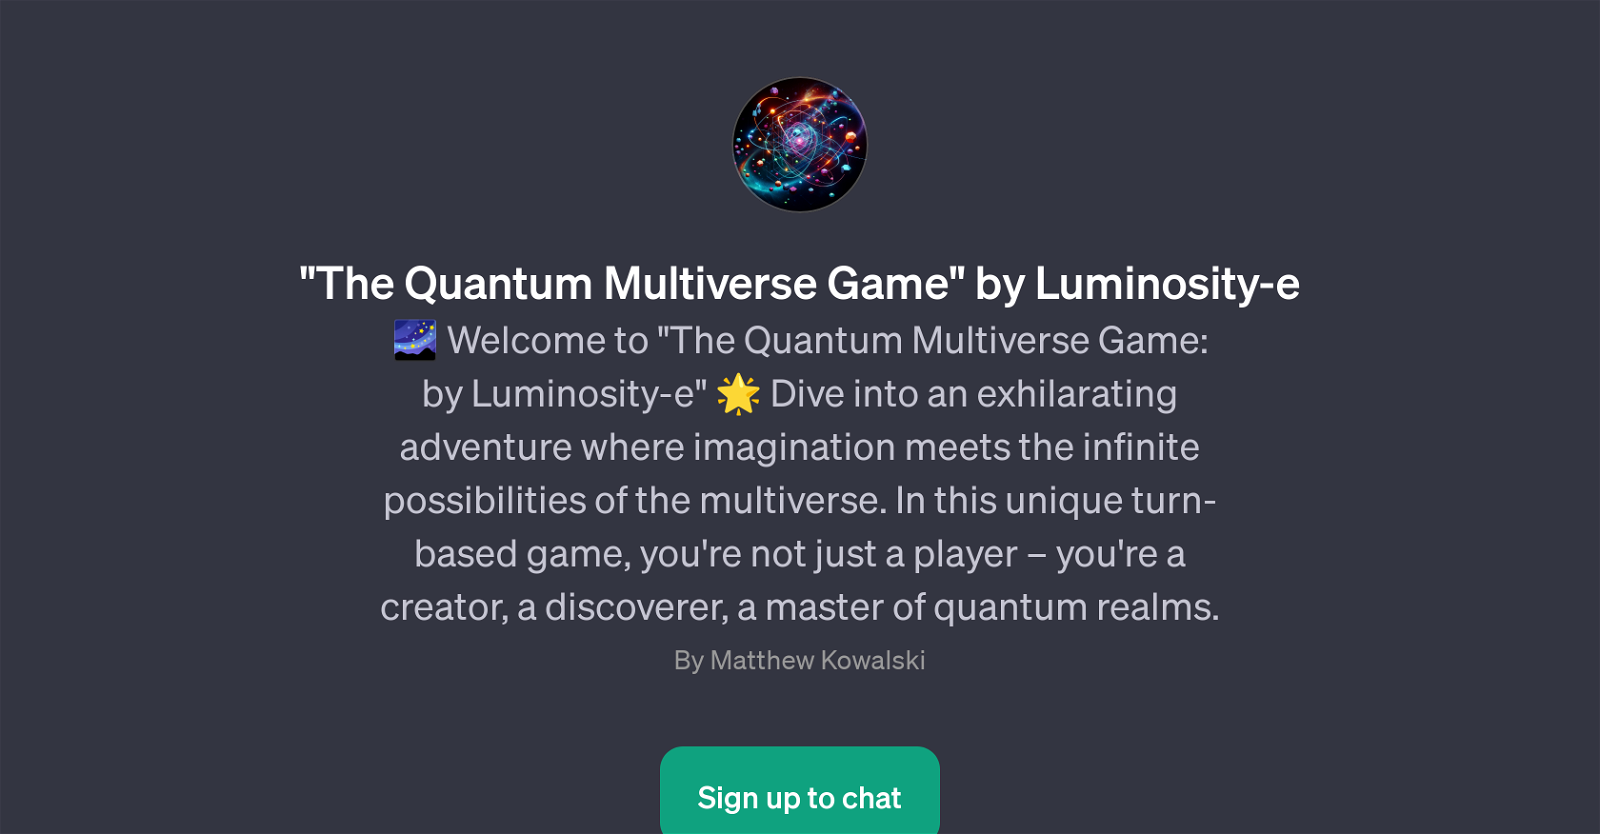 The Quantum Multiverse Game by Luminosity-e website